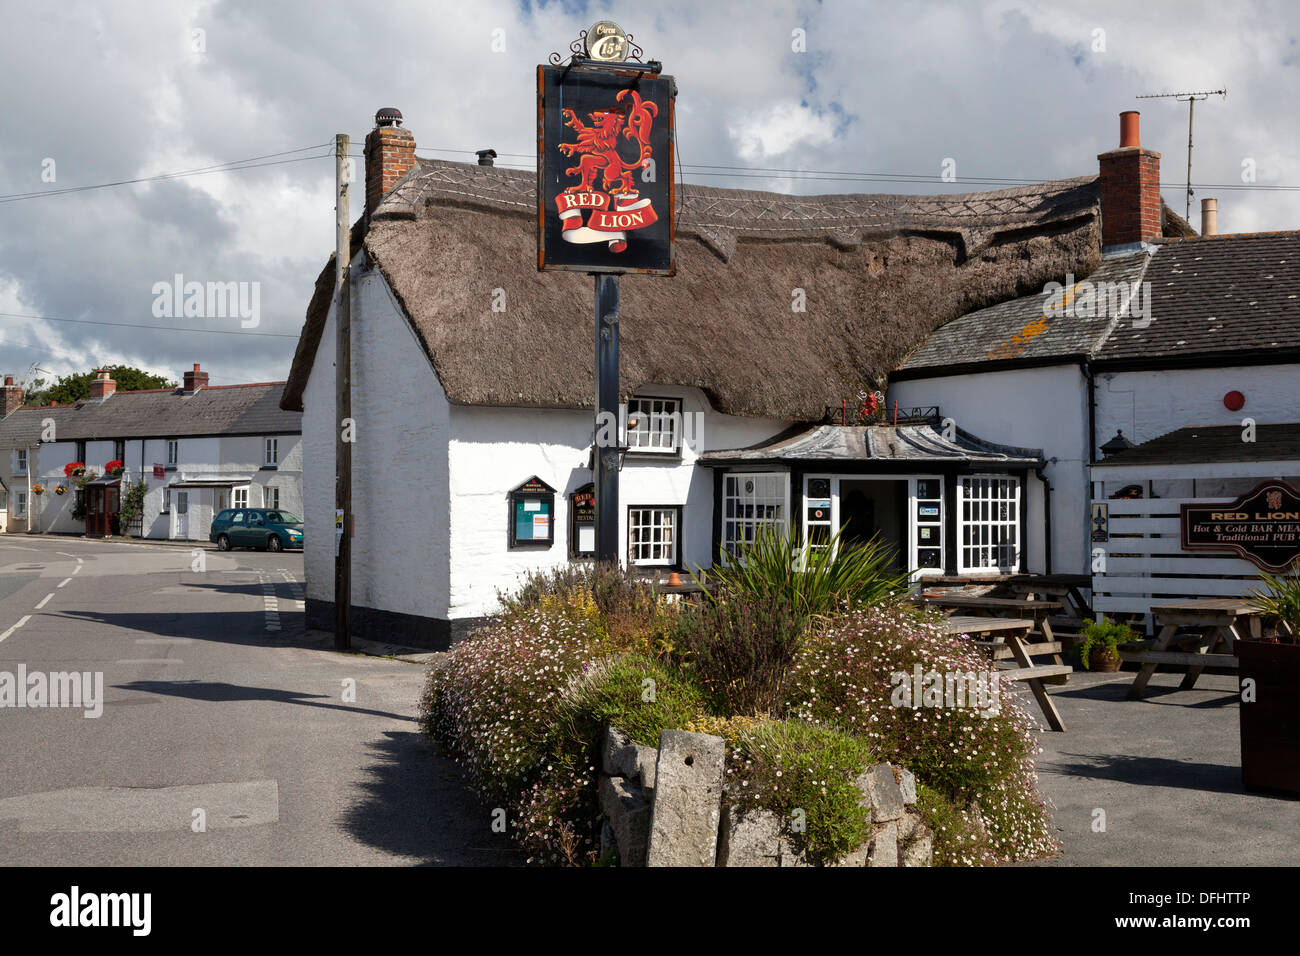 Centre Village et Red Lion Inn, Mawnan Smith, Cornwall Banque D'Images